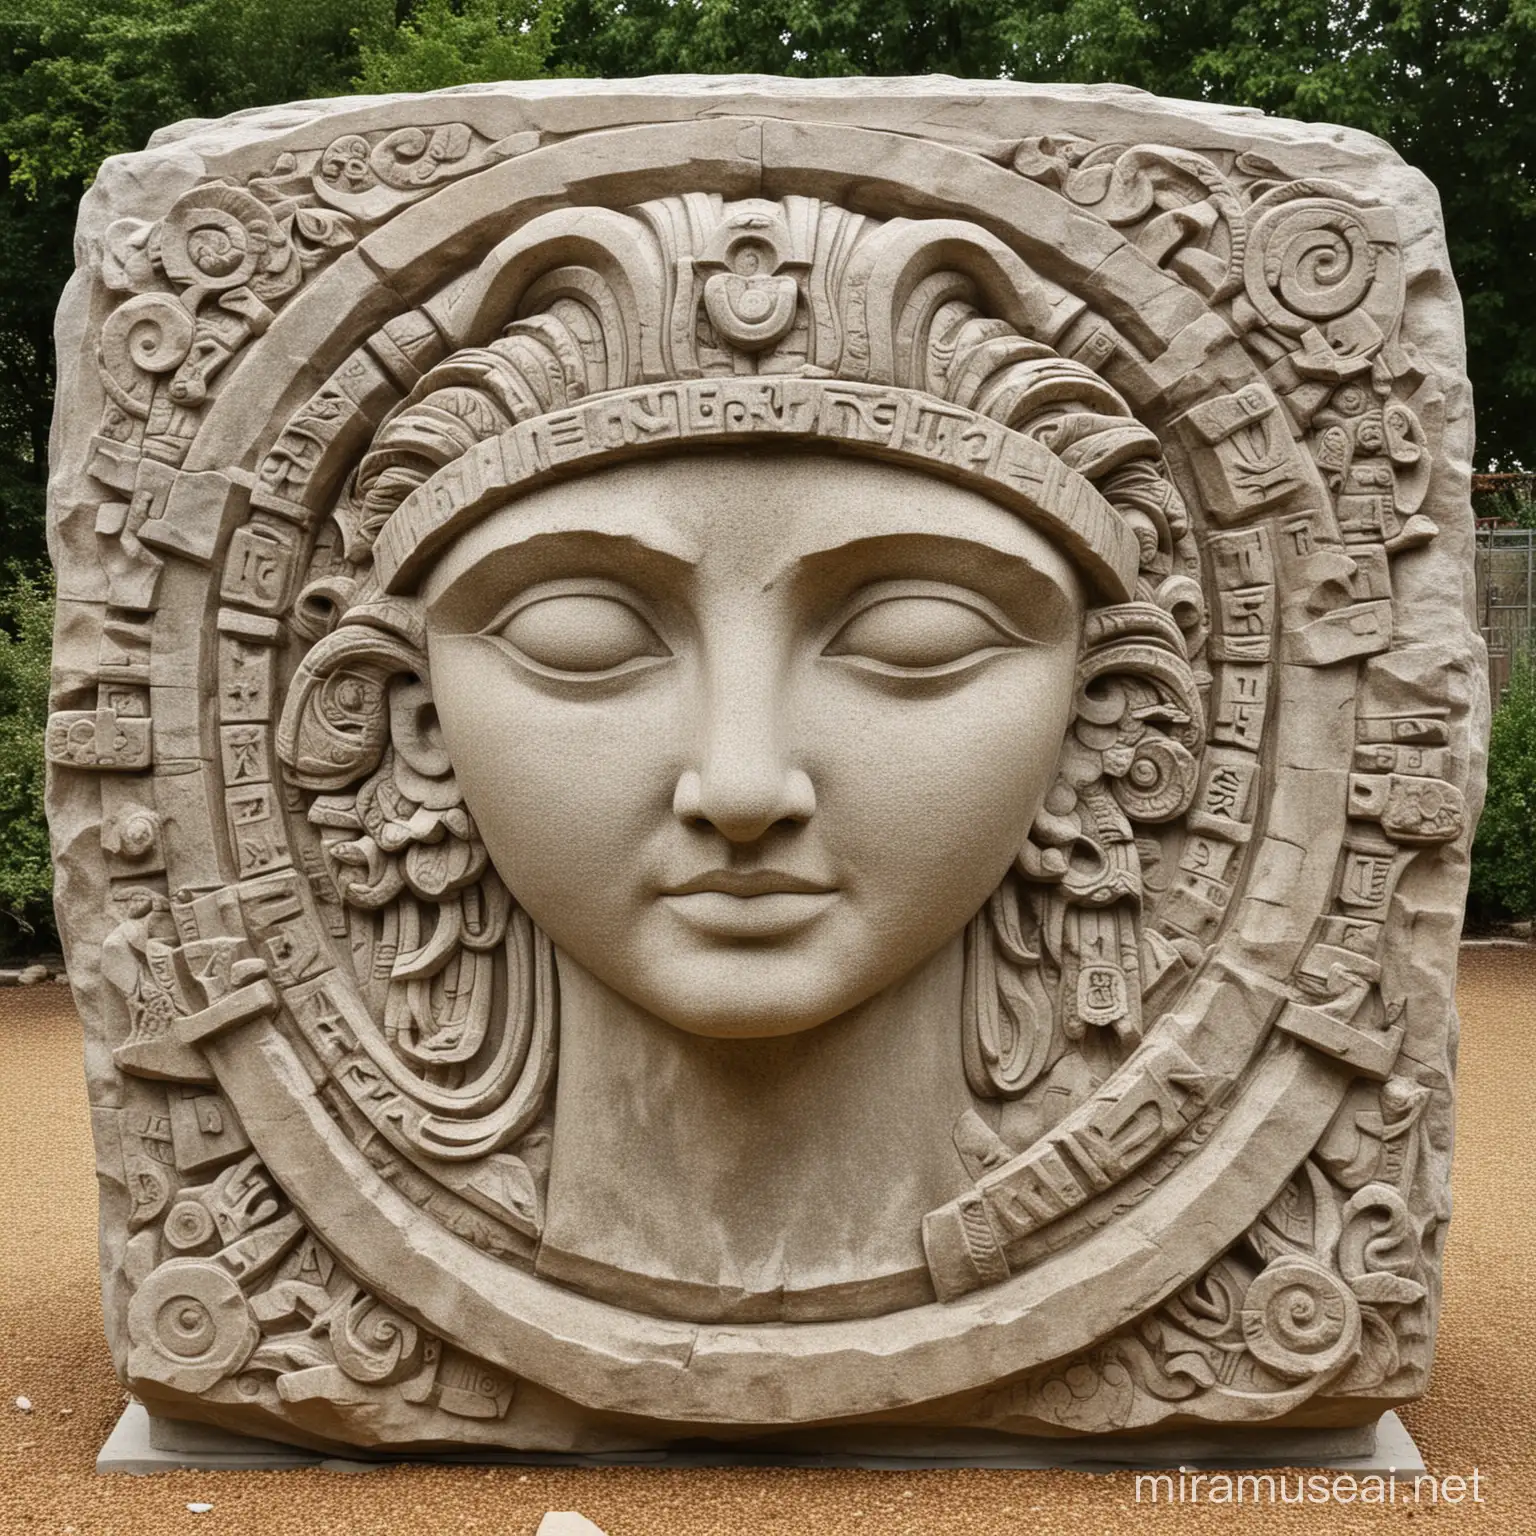 A big bold ancient Stone carving titled: "POWER OF IMAGINATION" 